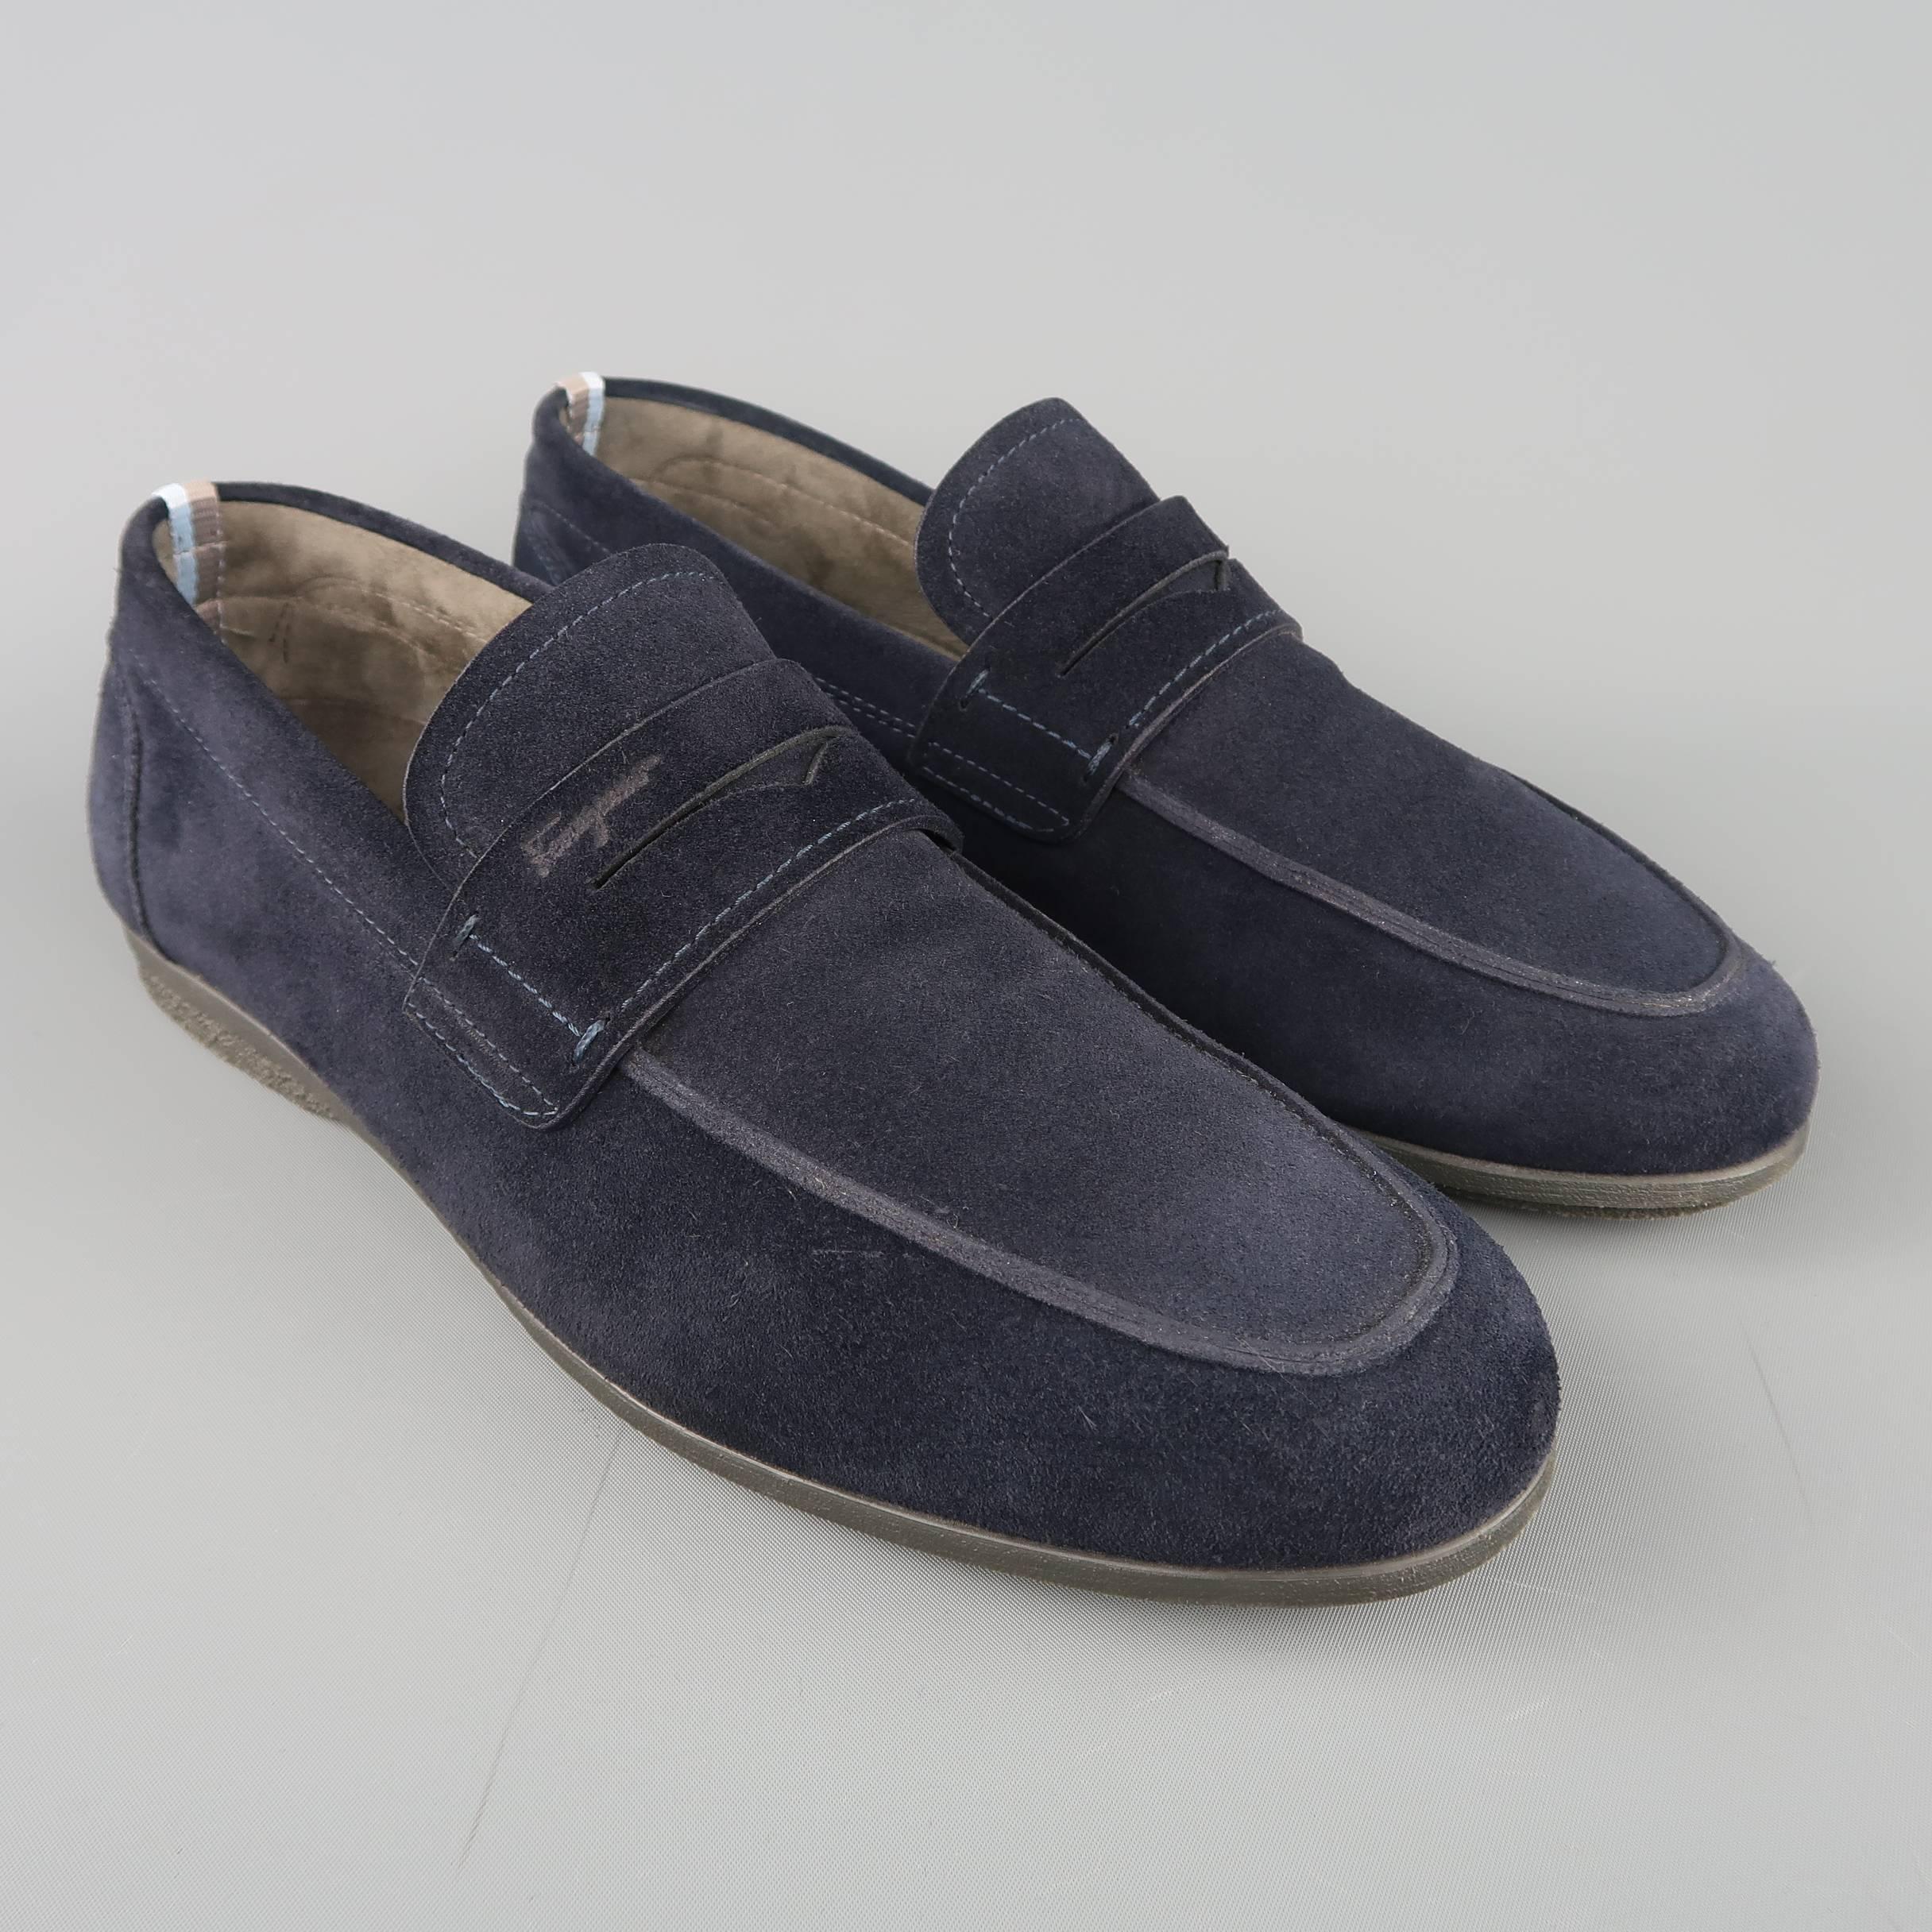 SALVATORE FERRAGAMO penny loafer comes in navy suede with an apron toe, striped ribbon detail, and rubber sole. Made in Italy.
 
Excellent Pre-Owned Condition.
Marked: UK 9.5
 
Outsole: 11.5 x 3.75 in.
